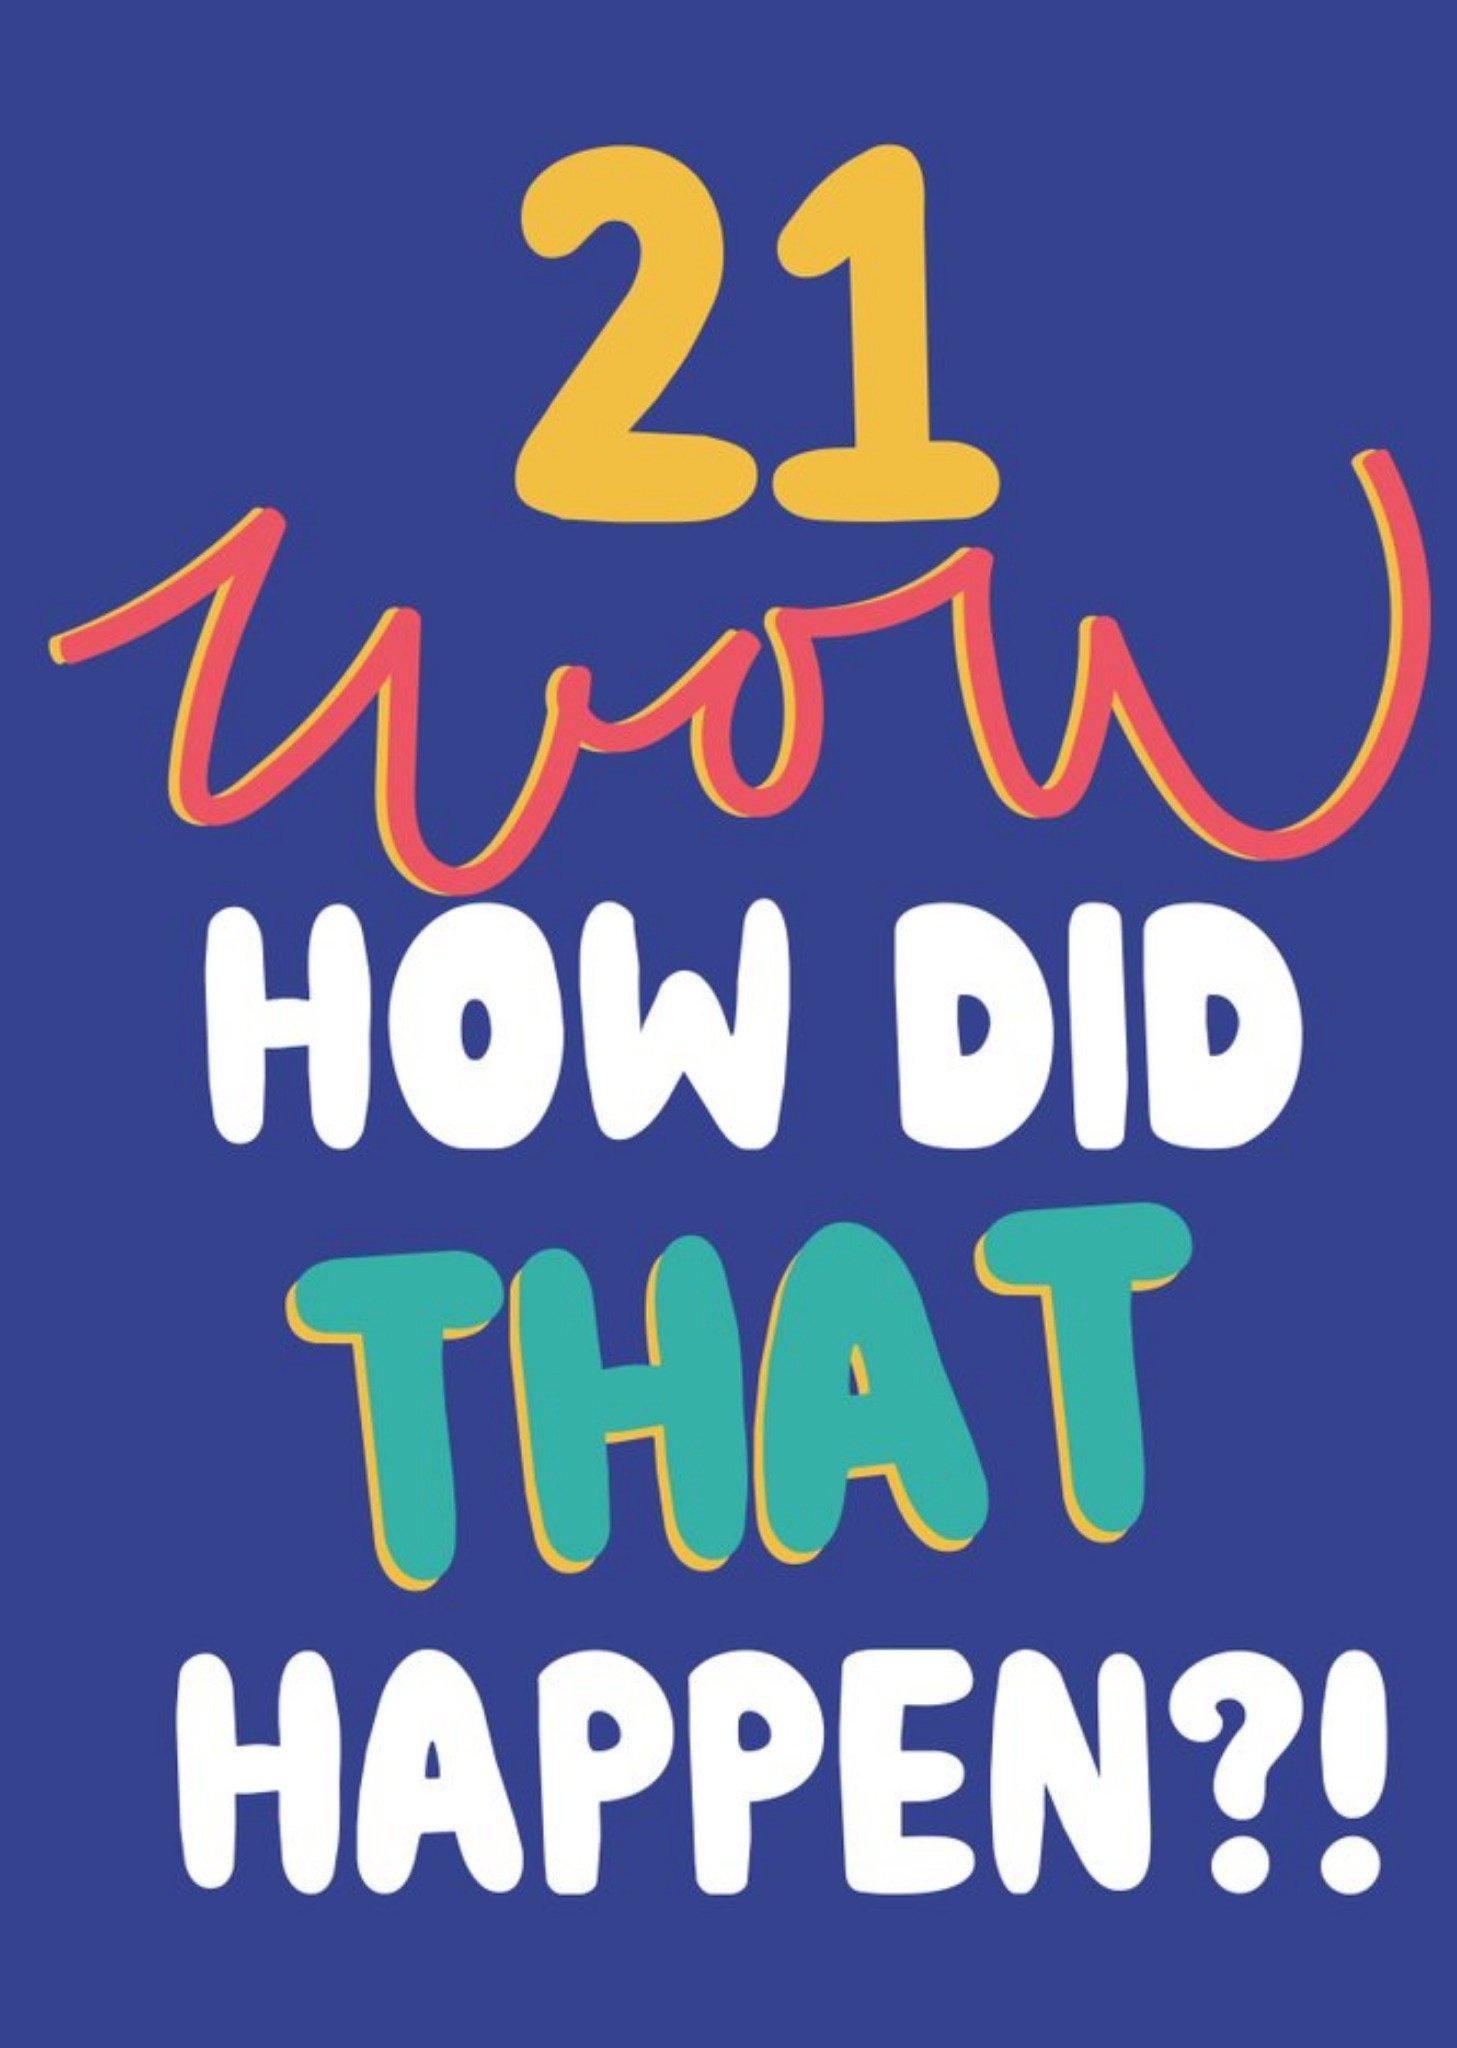 Moonpig 21 Wow How Did That Happen Bright Typographic Birthday Card, Large